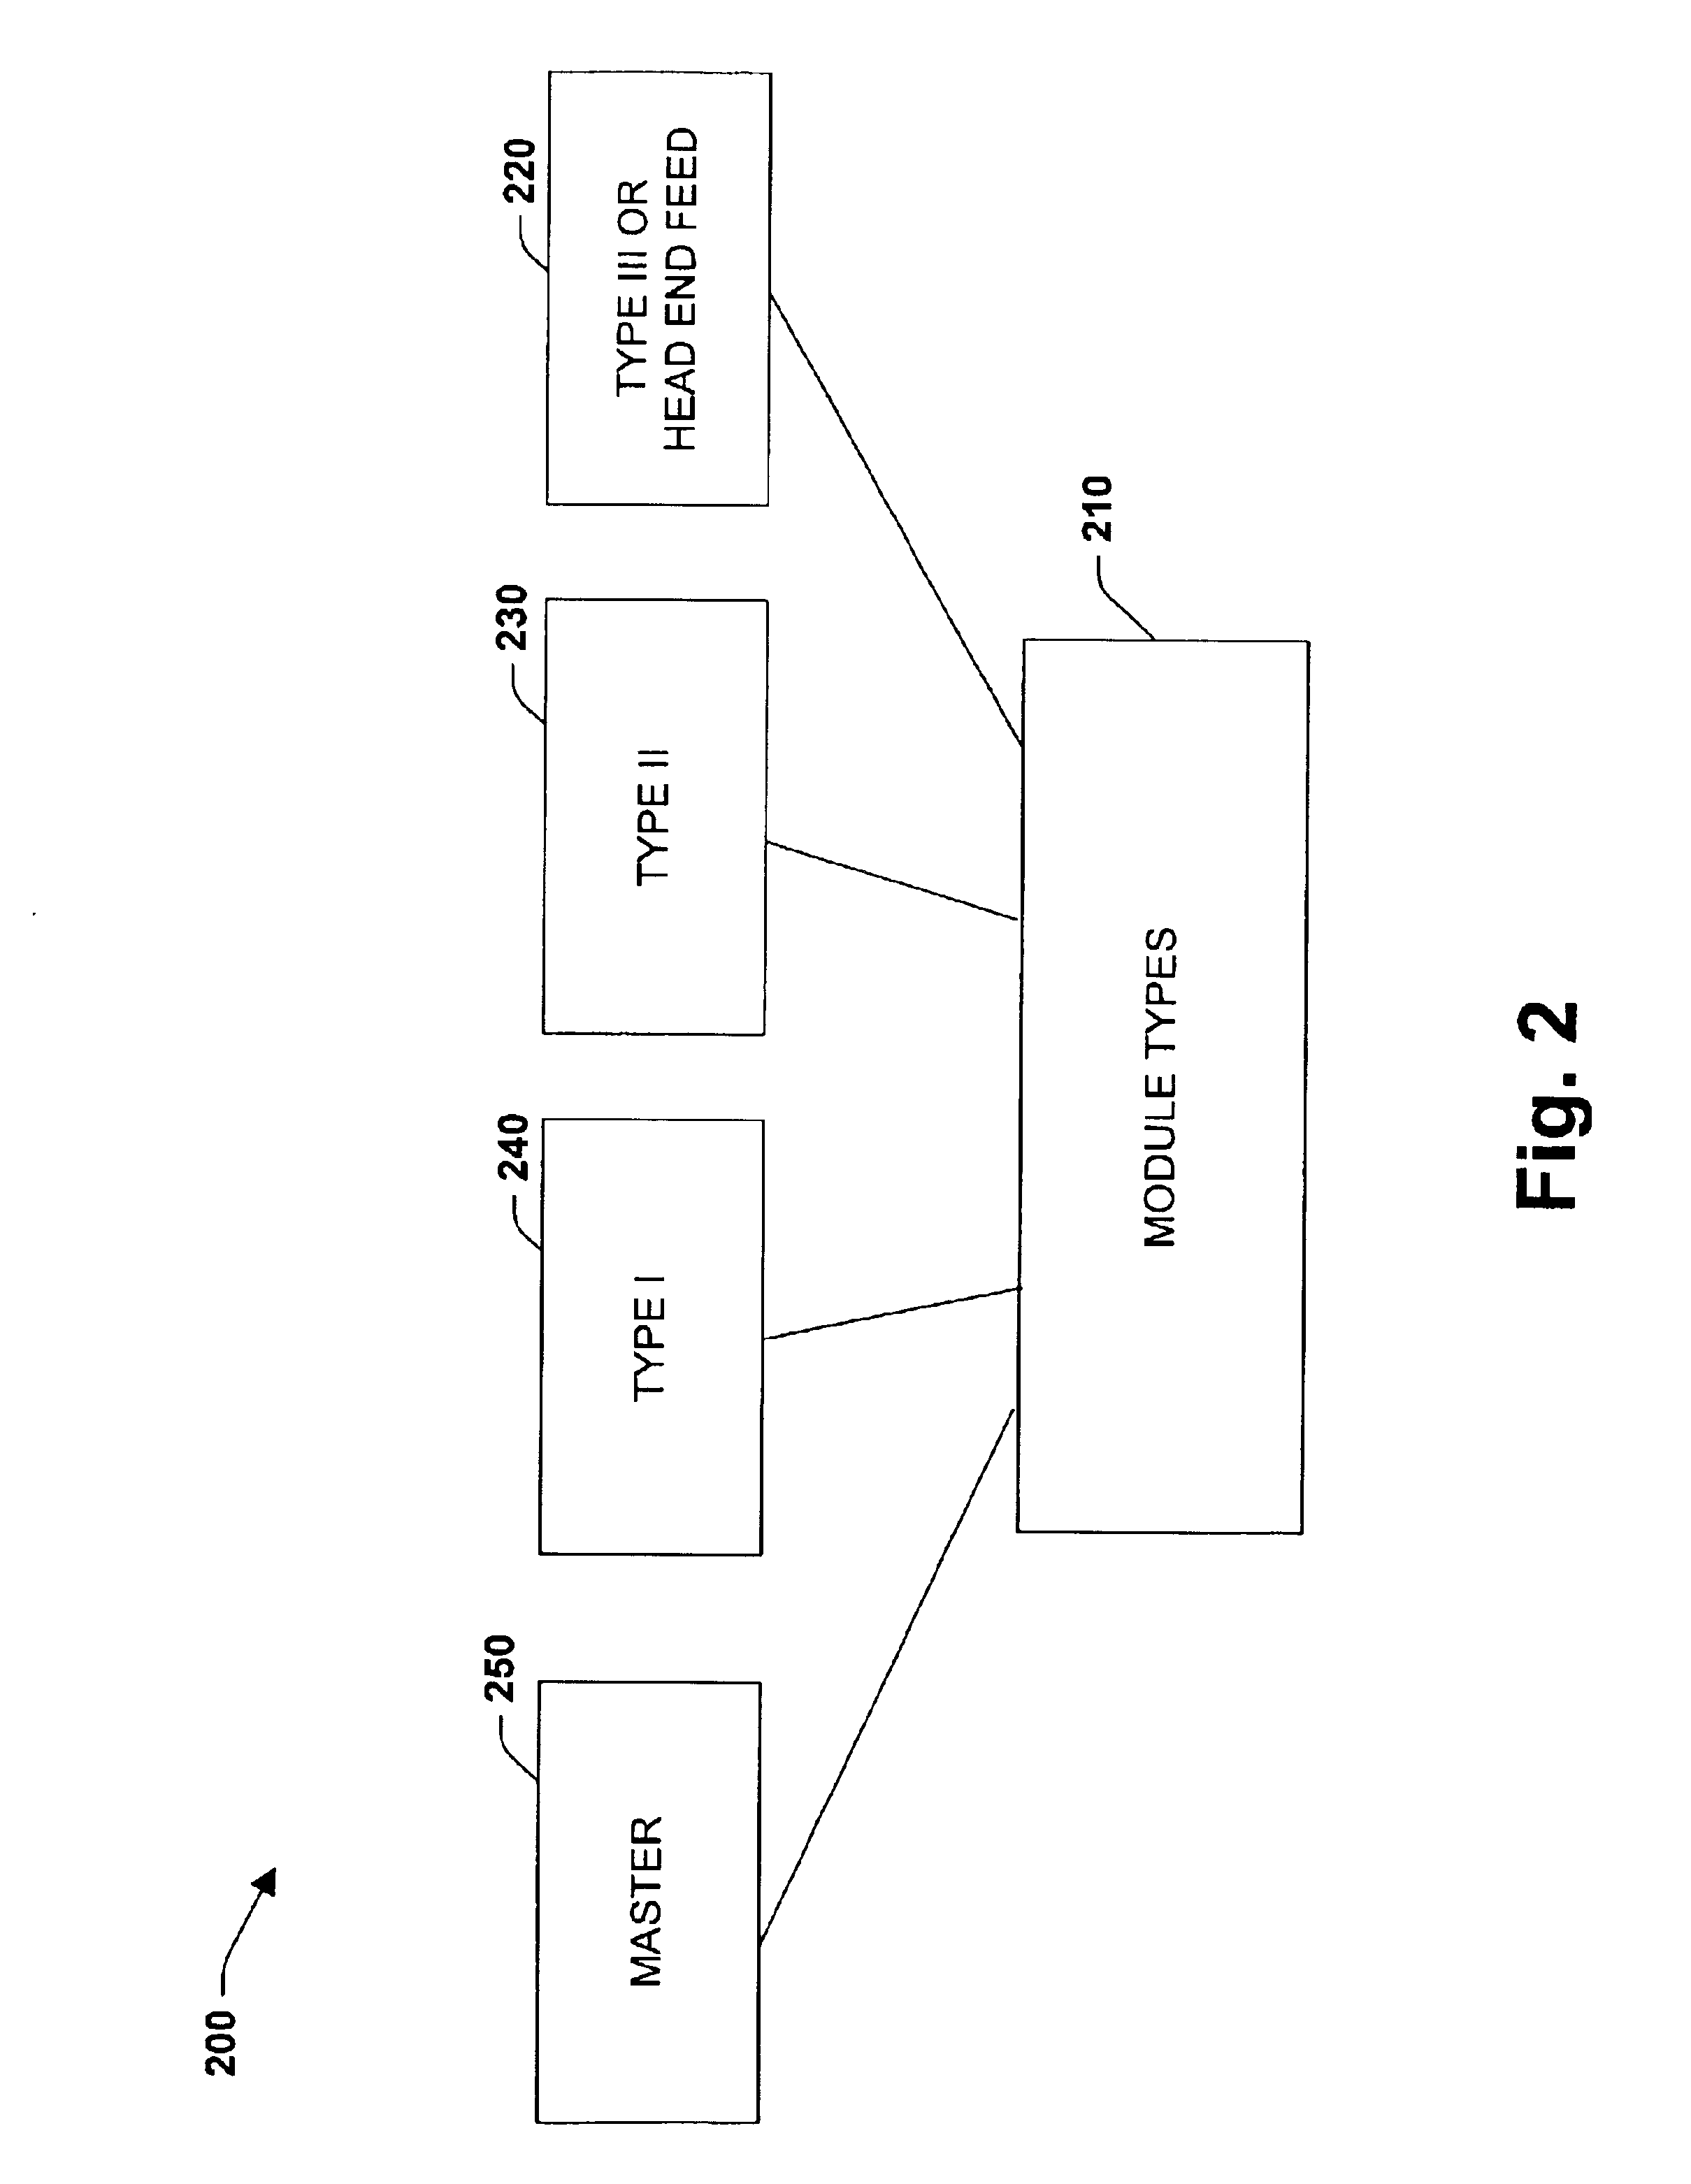 System and methodology providing coordinated and modular conveyor zone control